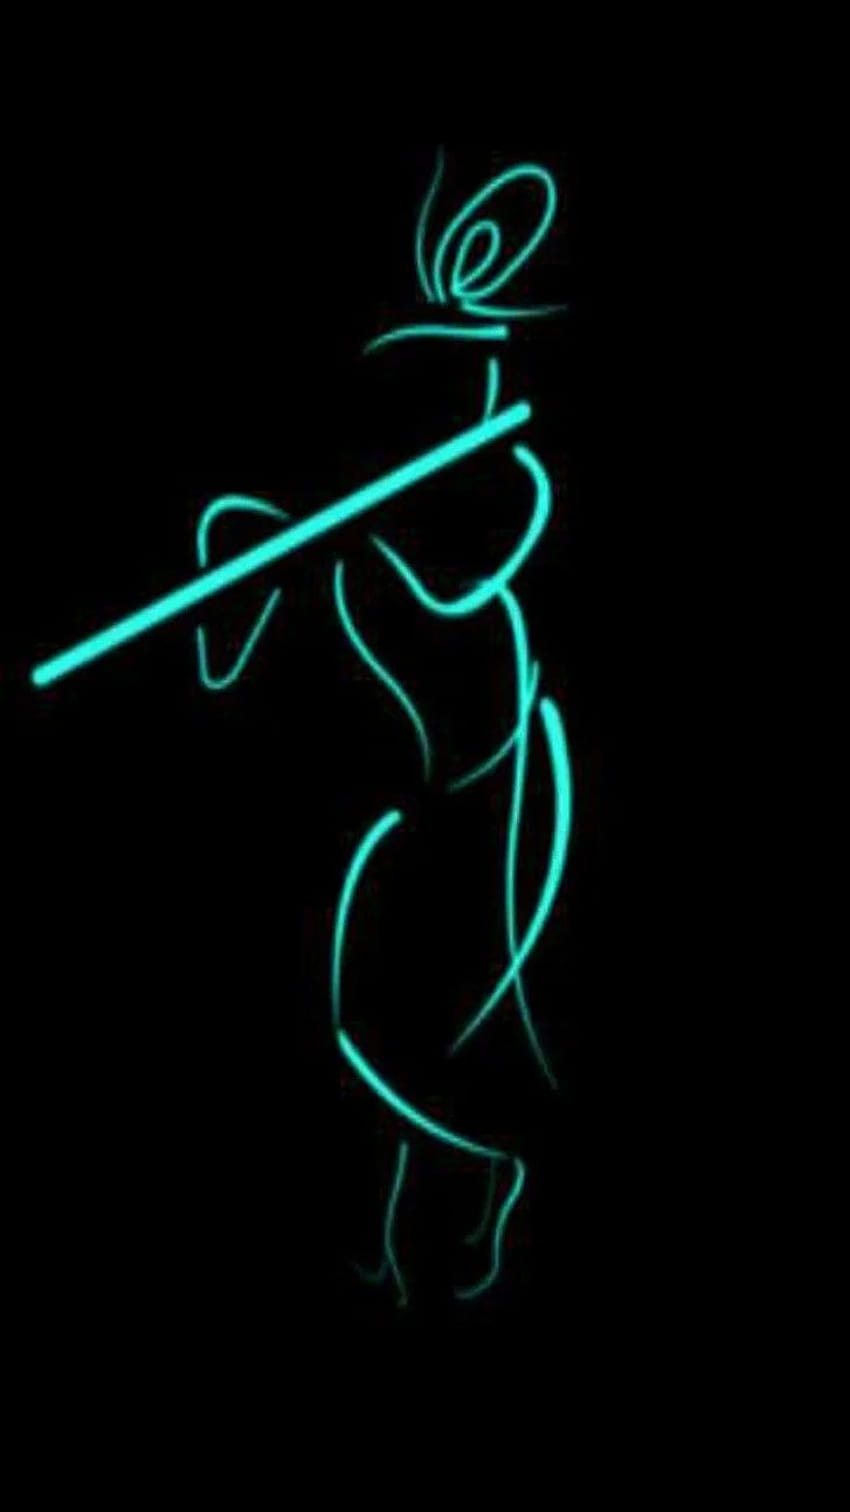 14 Advantages Of For Mobile, lord krishna 3d in black background ...